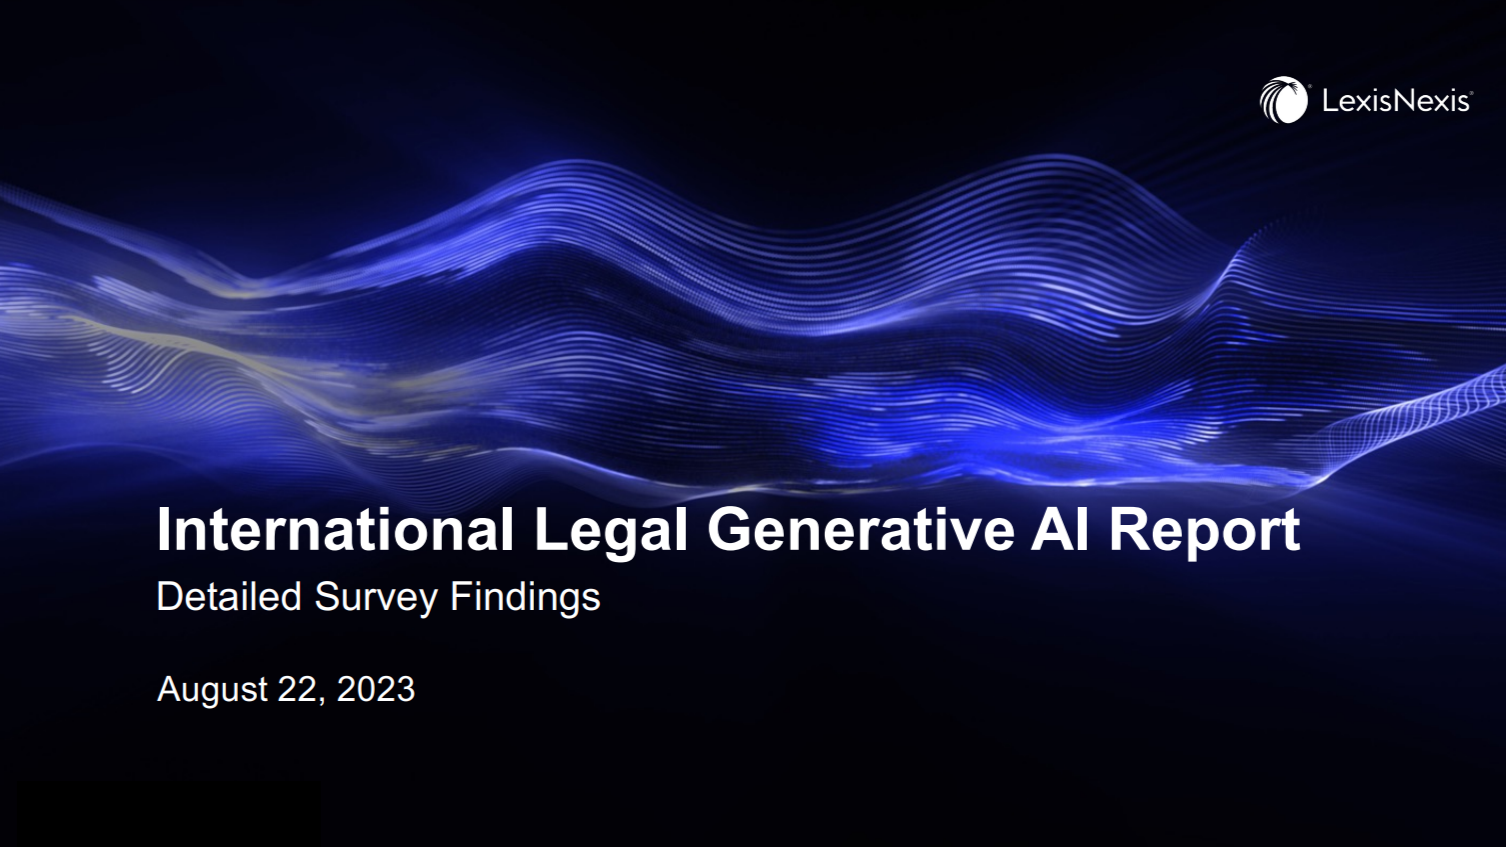 Nearly Half of Legal Professionals and Consumers Believe Generative AI Will Transform Law Practice, LexisNexis Survey Finds